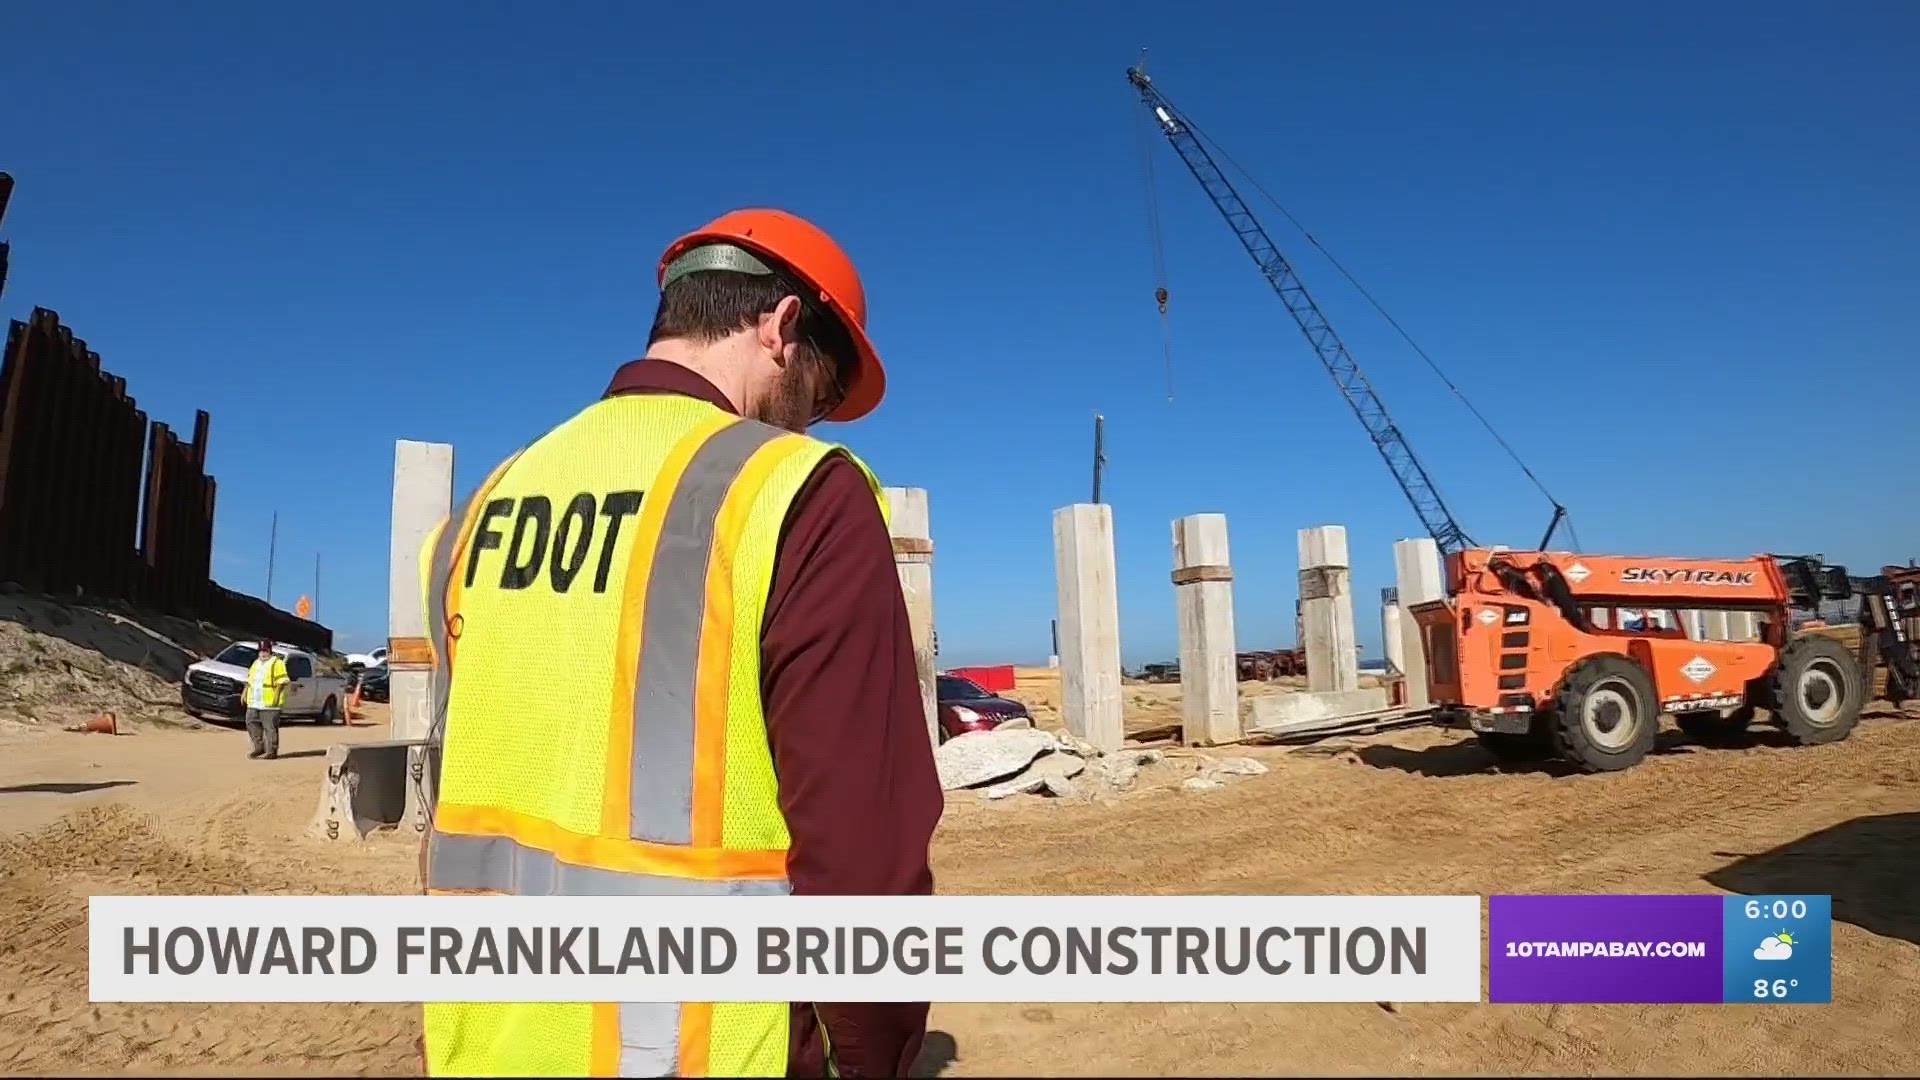 The new Howard Frankland Bridge is expected to be completed in 2025.